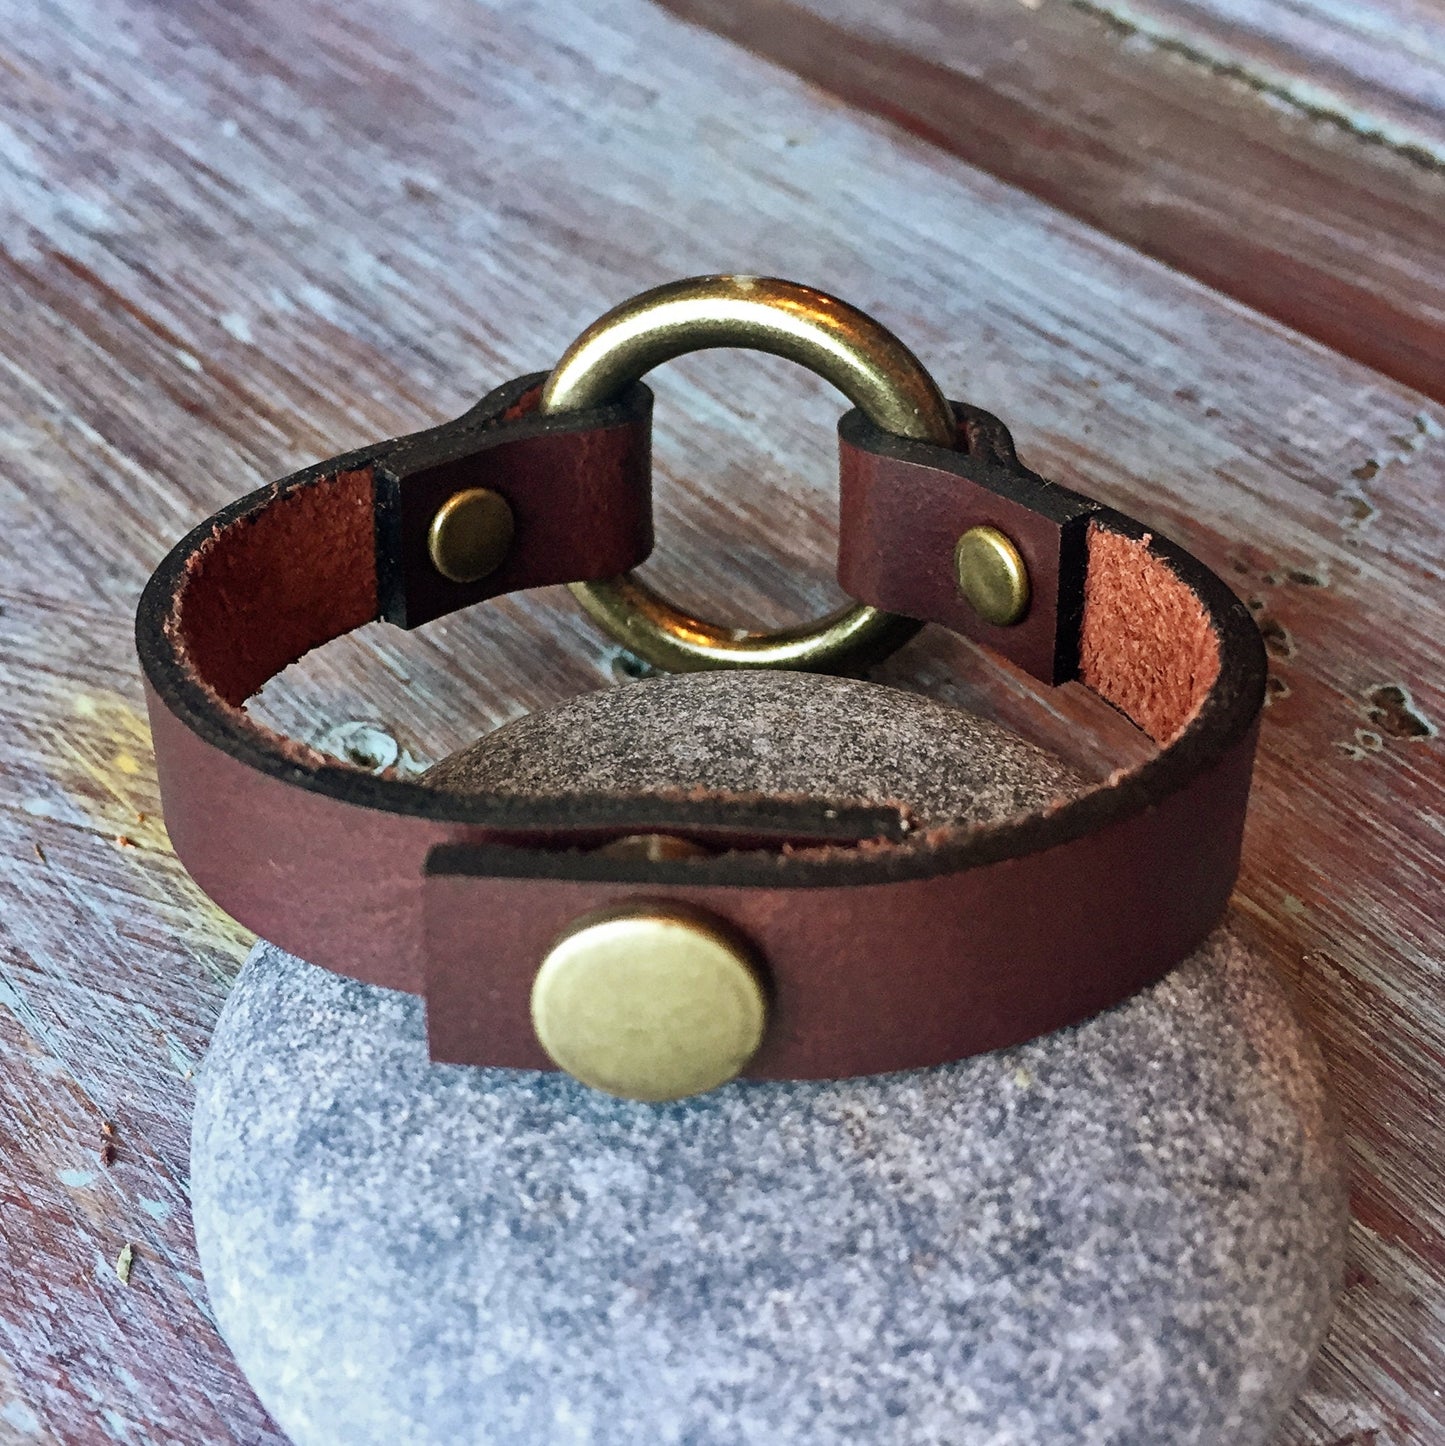 Engraved Leather Bracelet for Women & Men | Womens Leather Jewelry | Leather Wrap Cuff | Boho Bracelet | Mens Leather Cuff